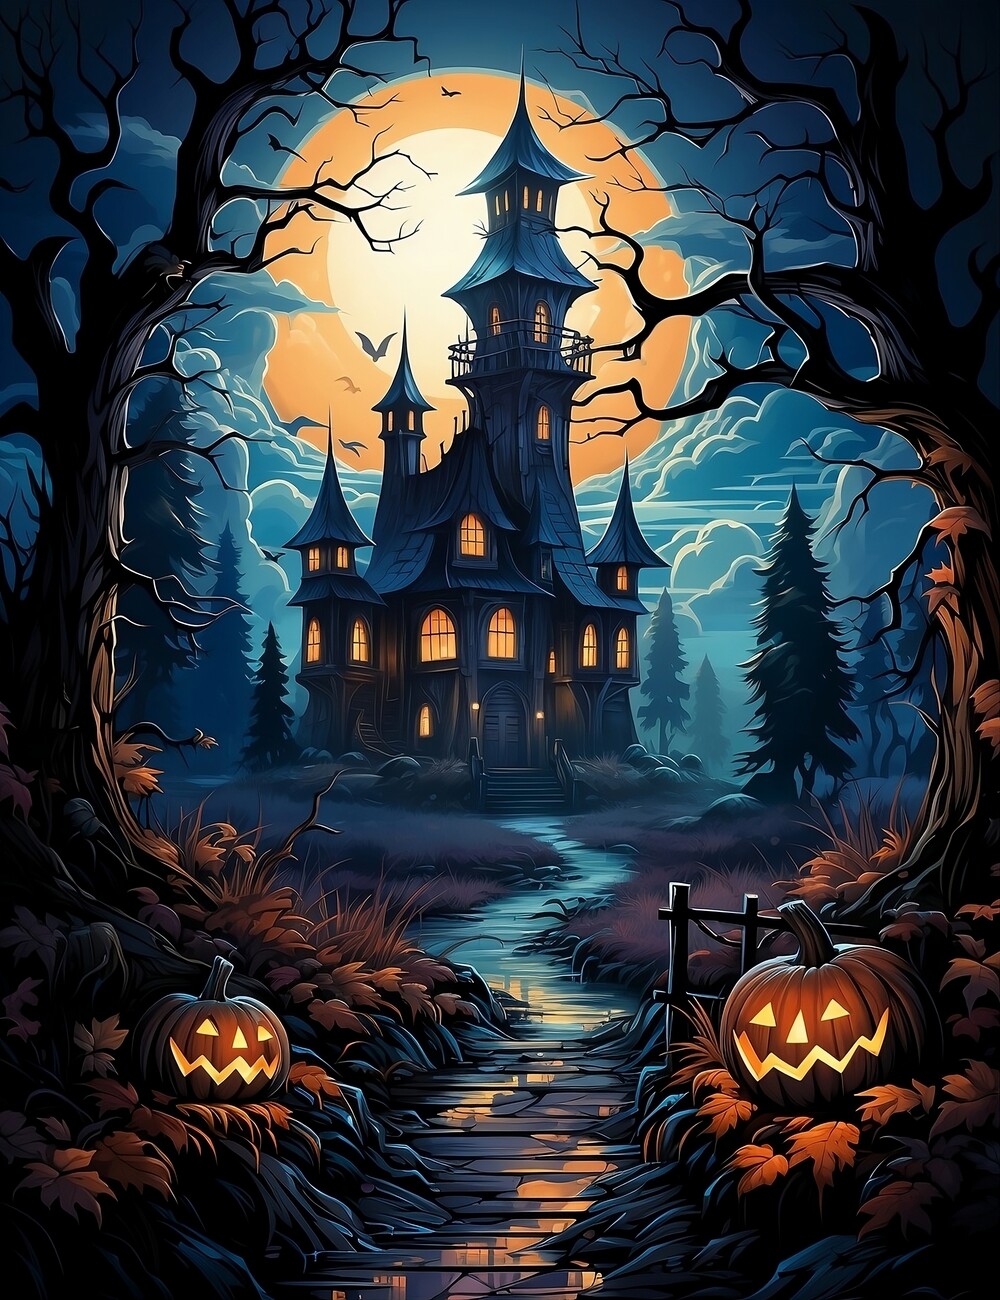 Spooky Month Original Illustration - Spooky Month - Posters and Art Prints